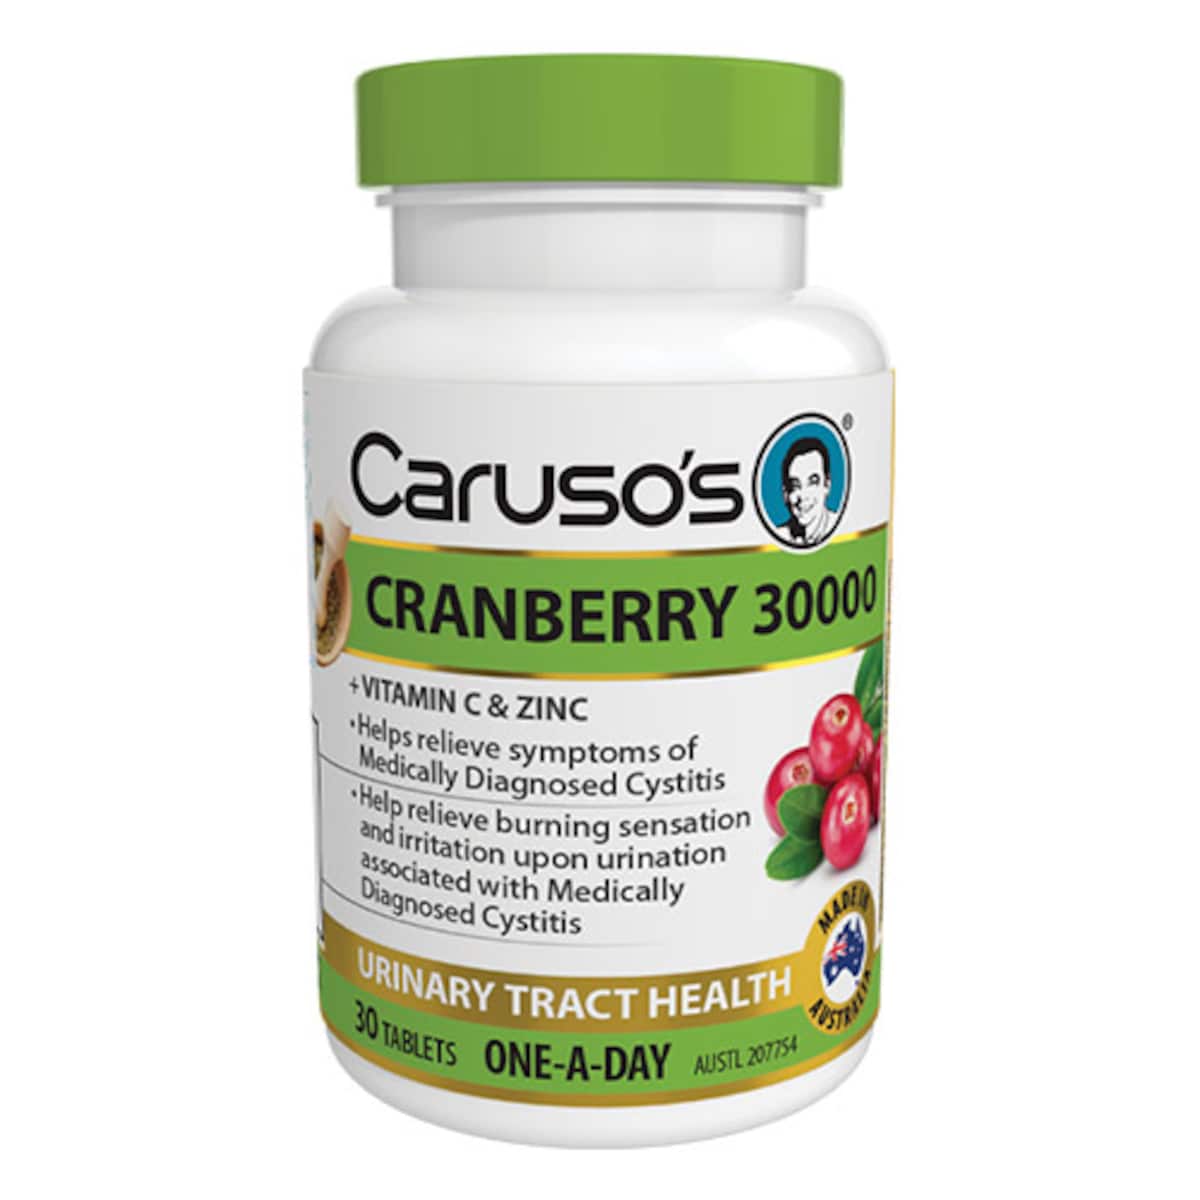 Carusos Cranberry 30000 High Potency 30 Tablets